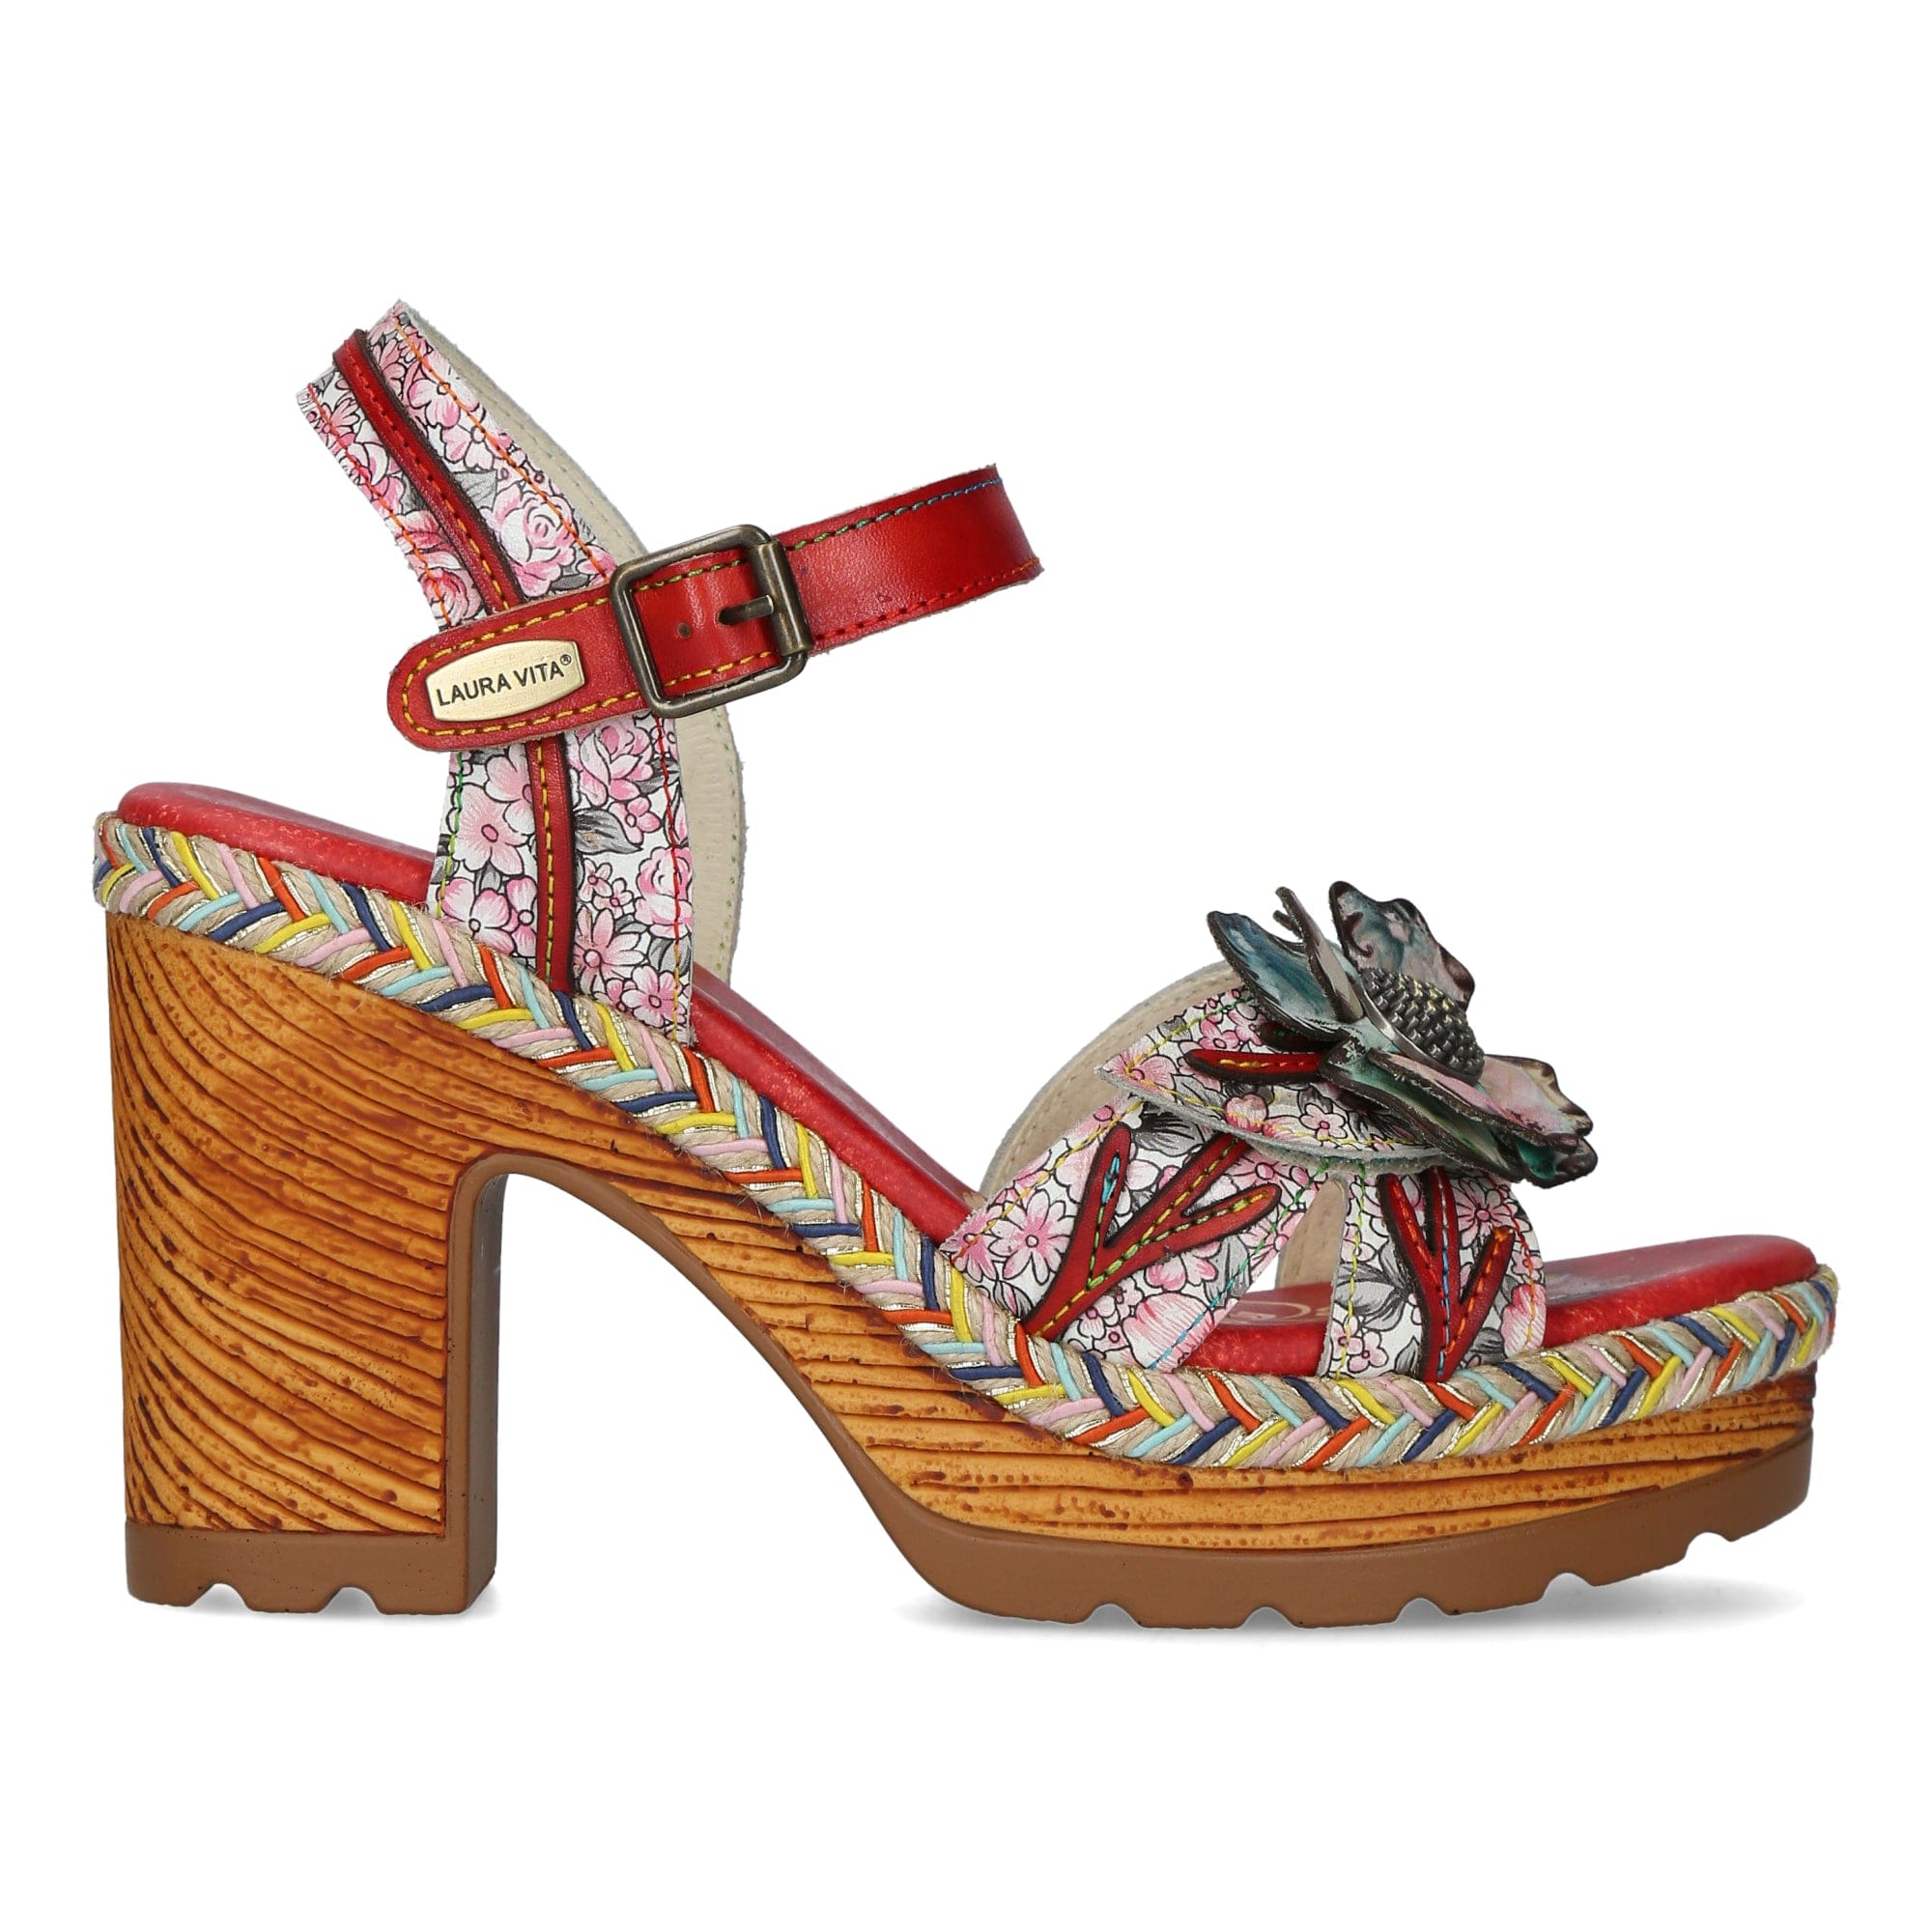 JACAO 08 - 35 / Red - Sandal